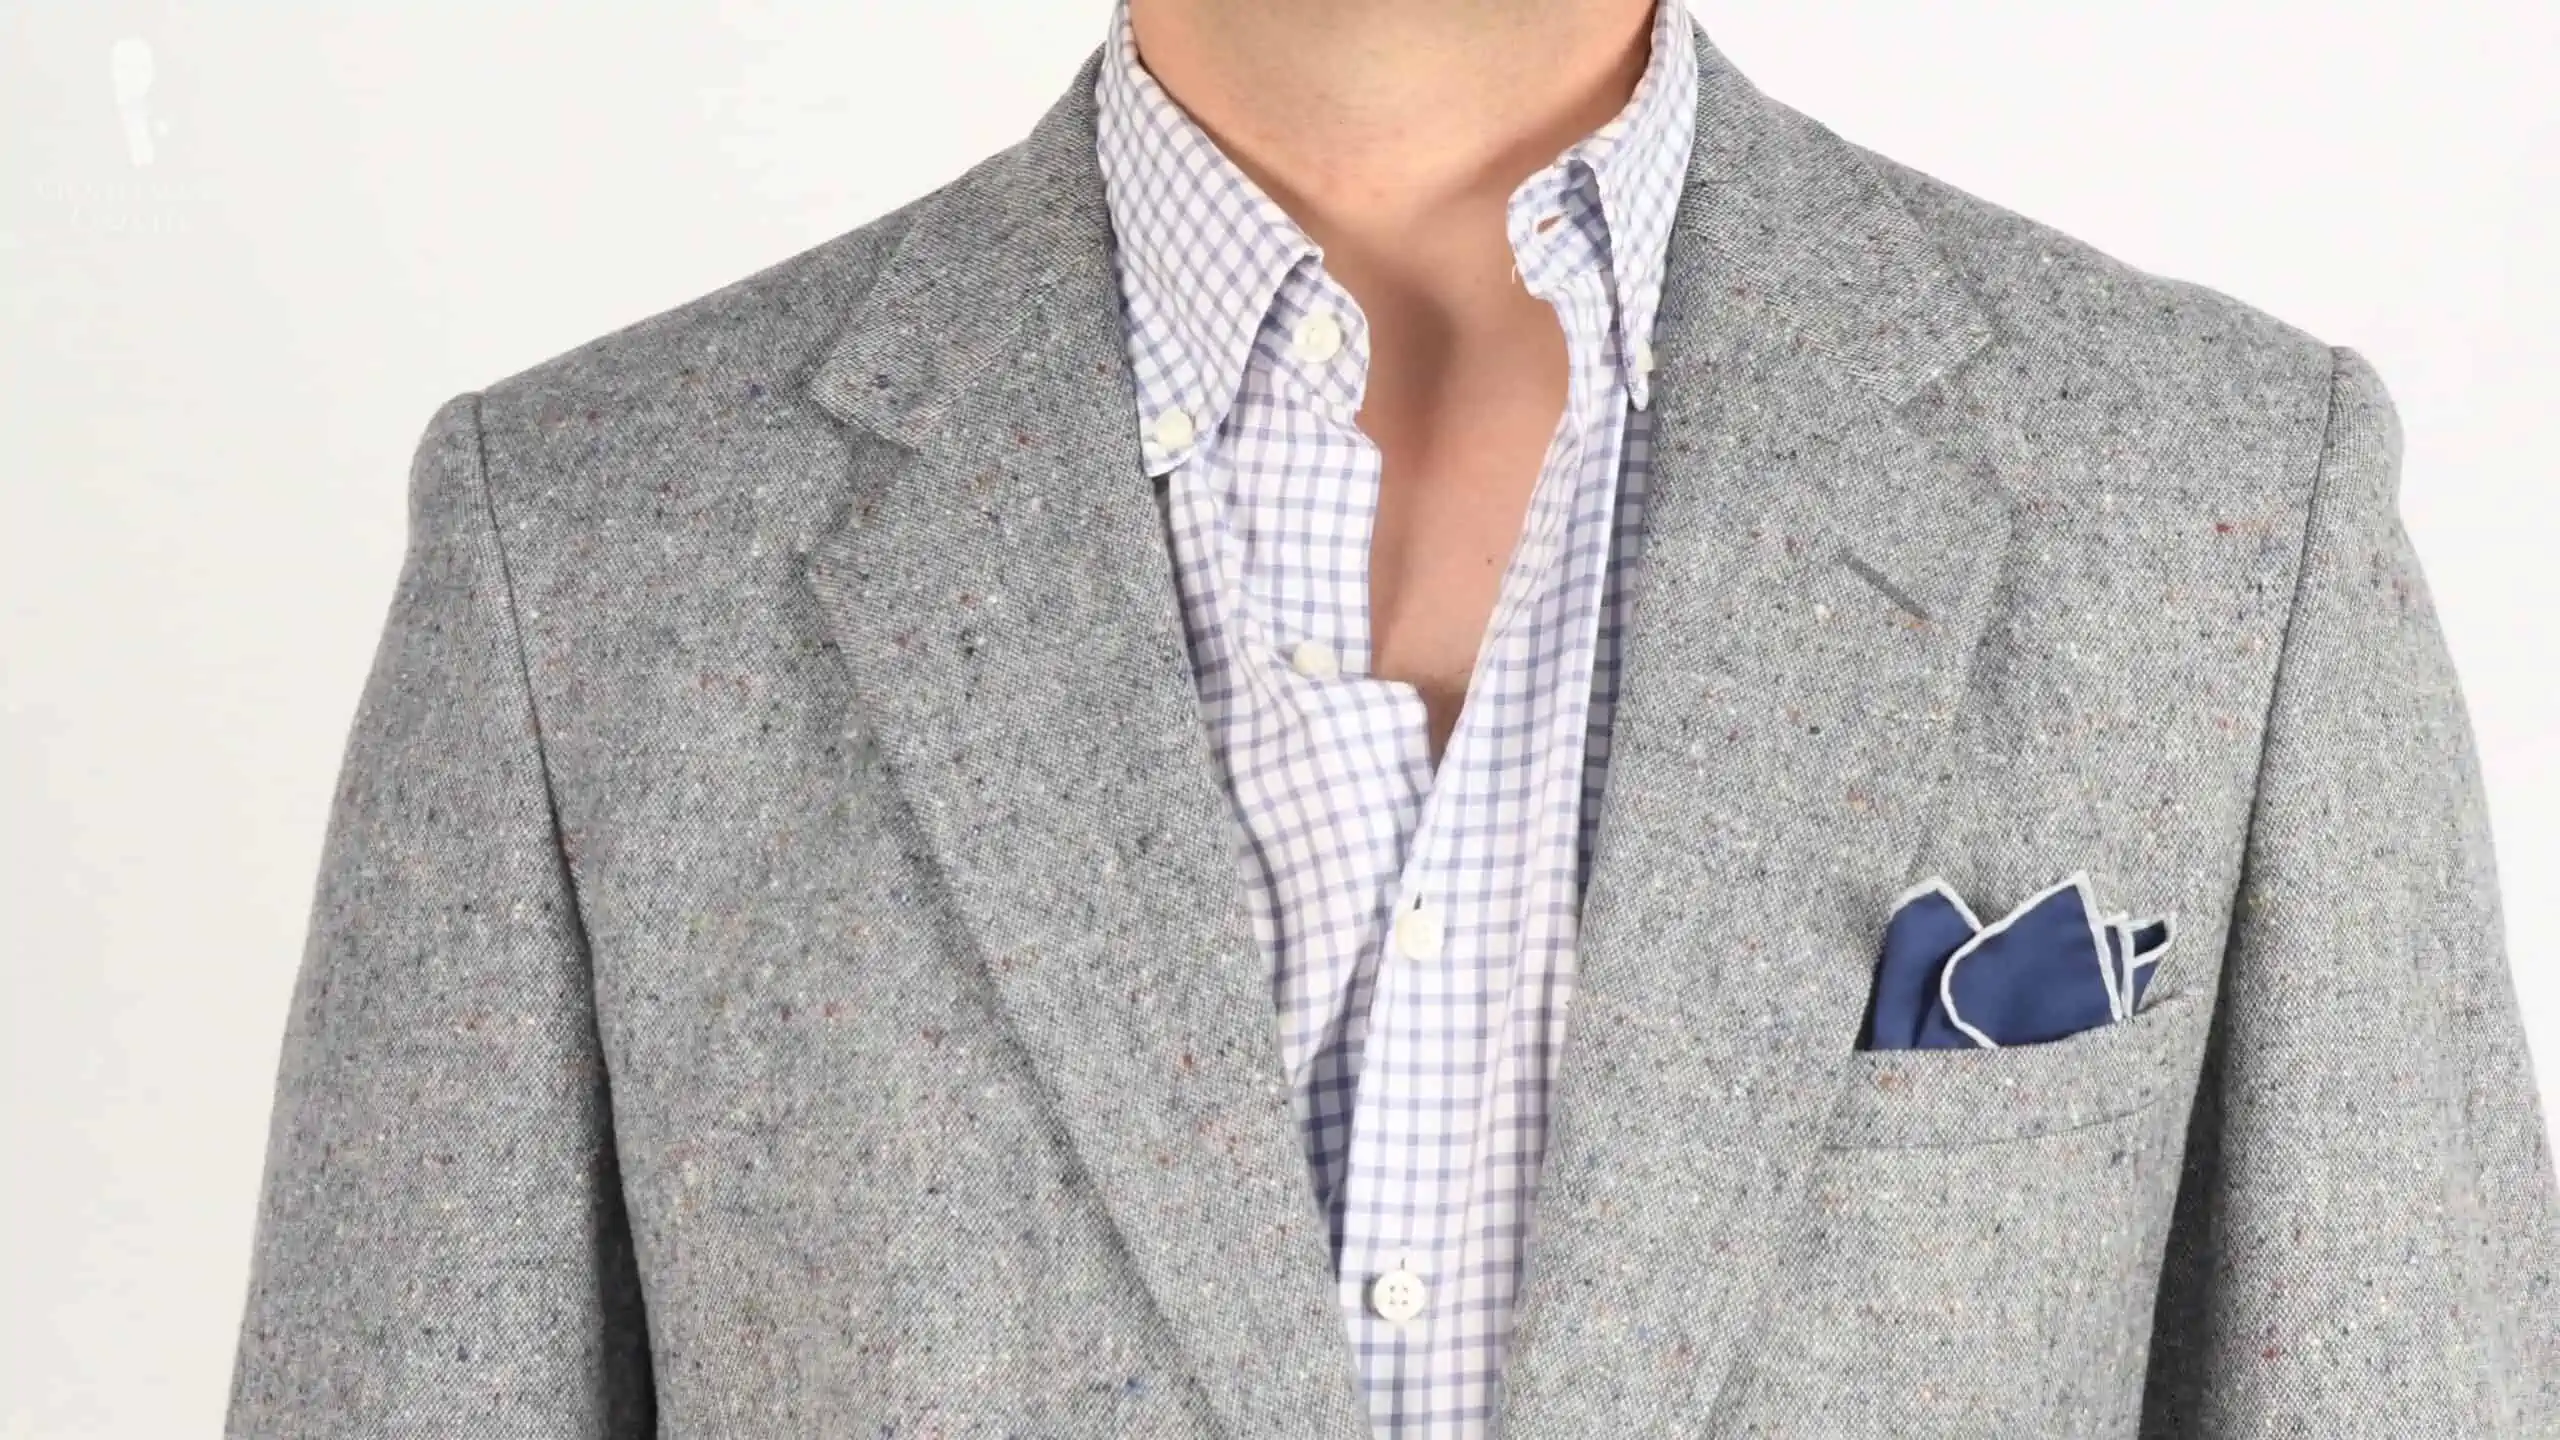 A dark blue pocket square with gray suit